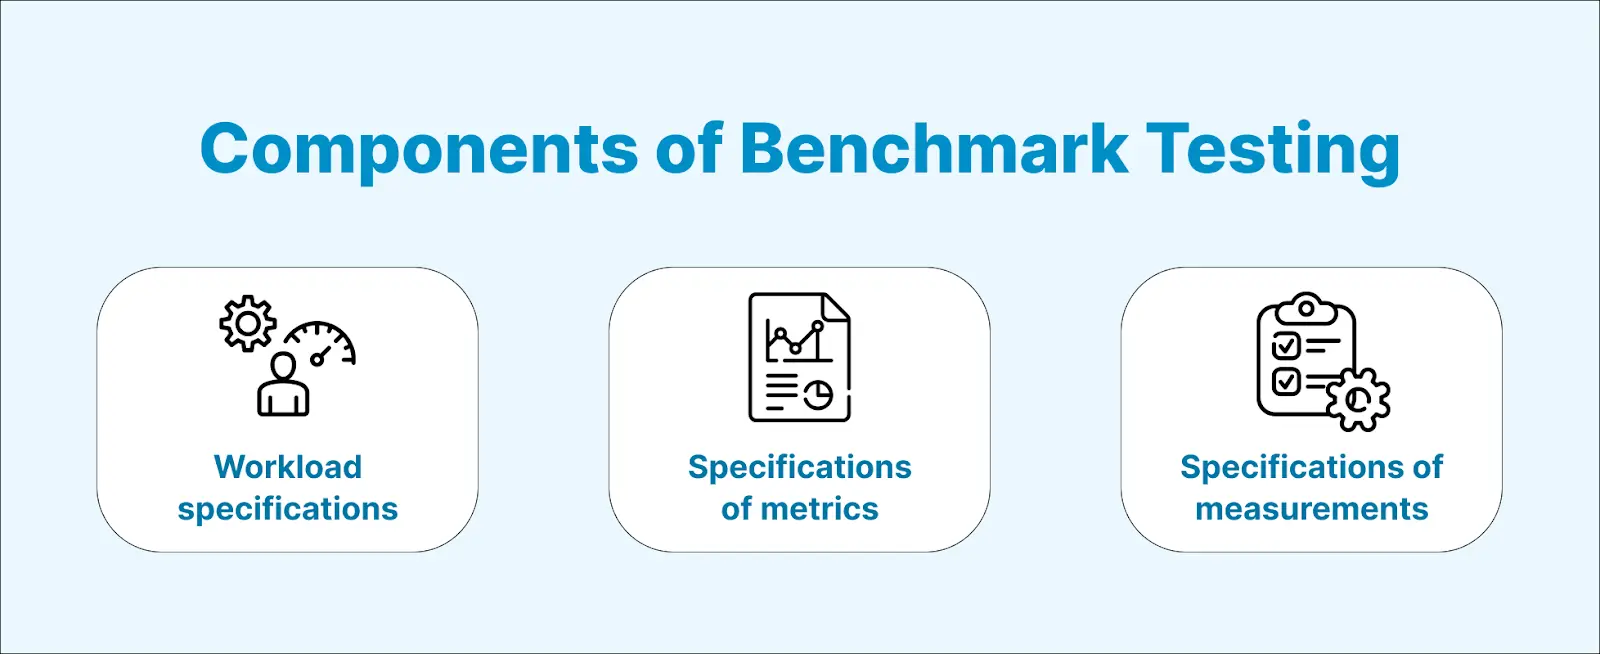 Components of Benchmark Testing